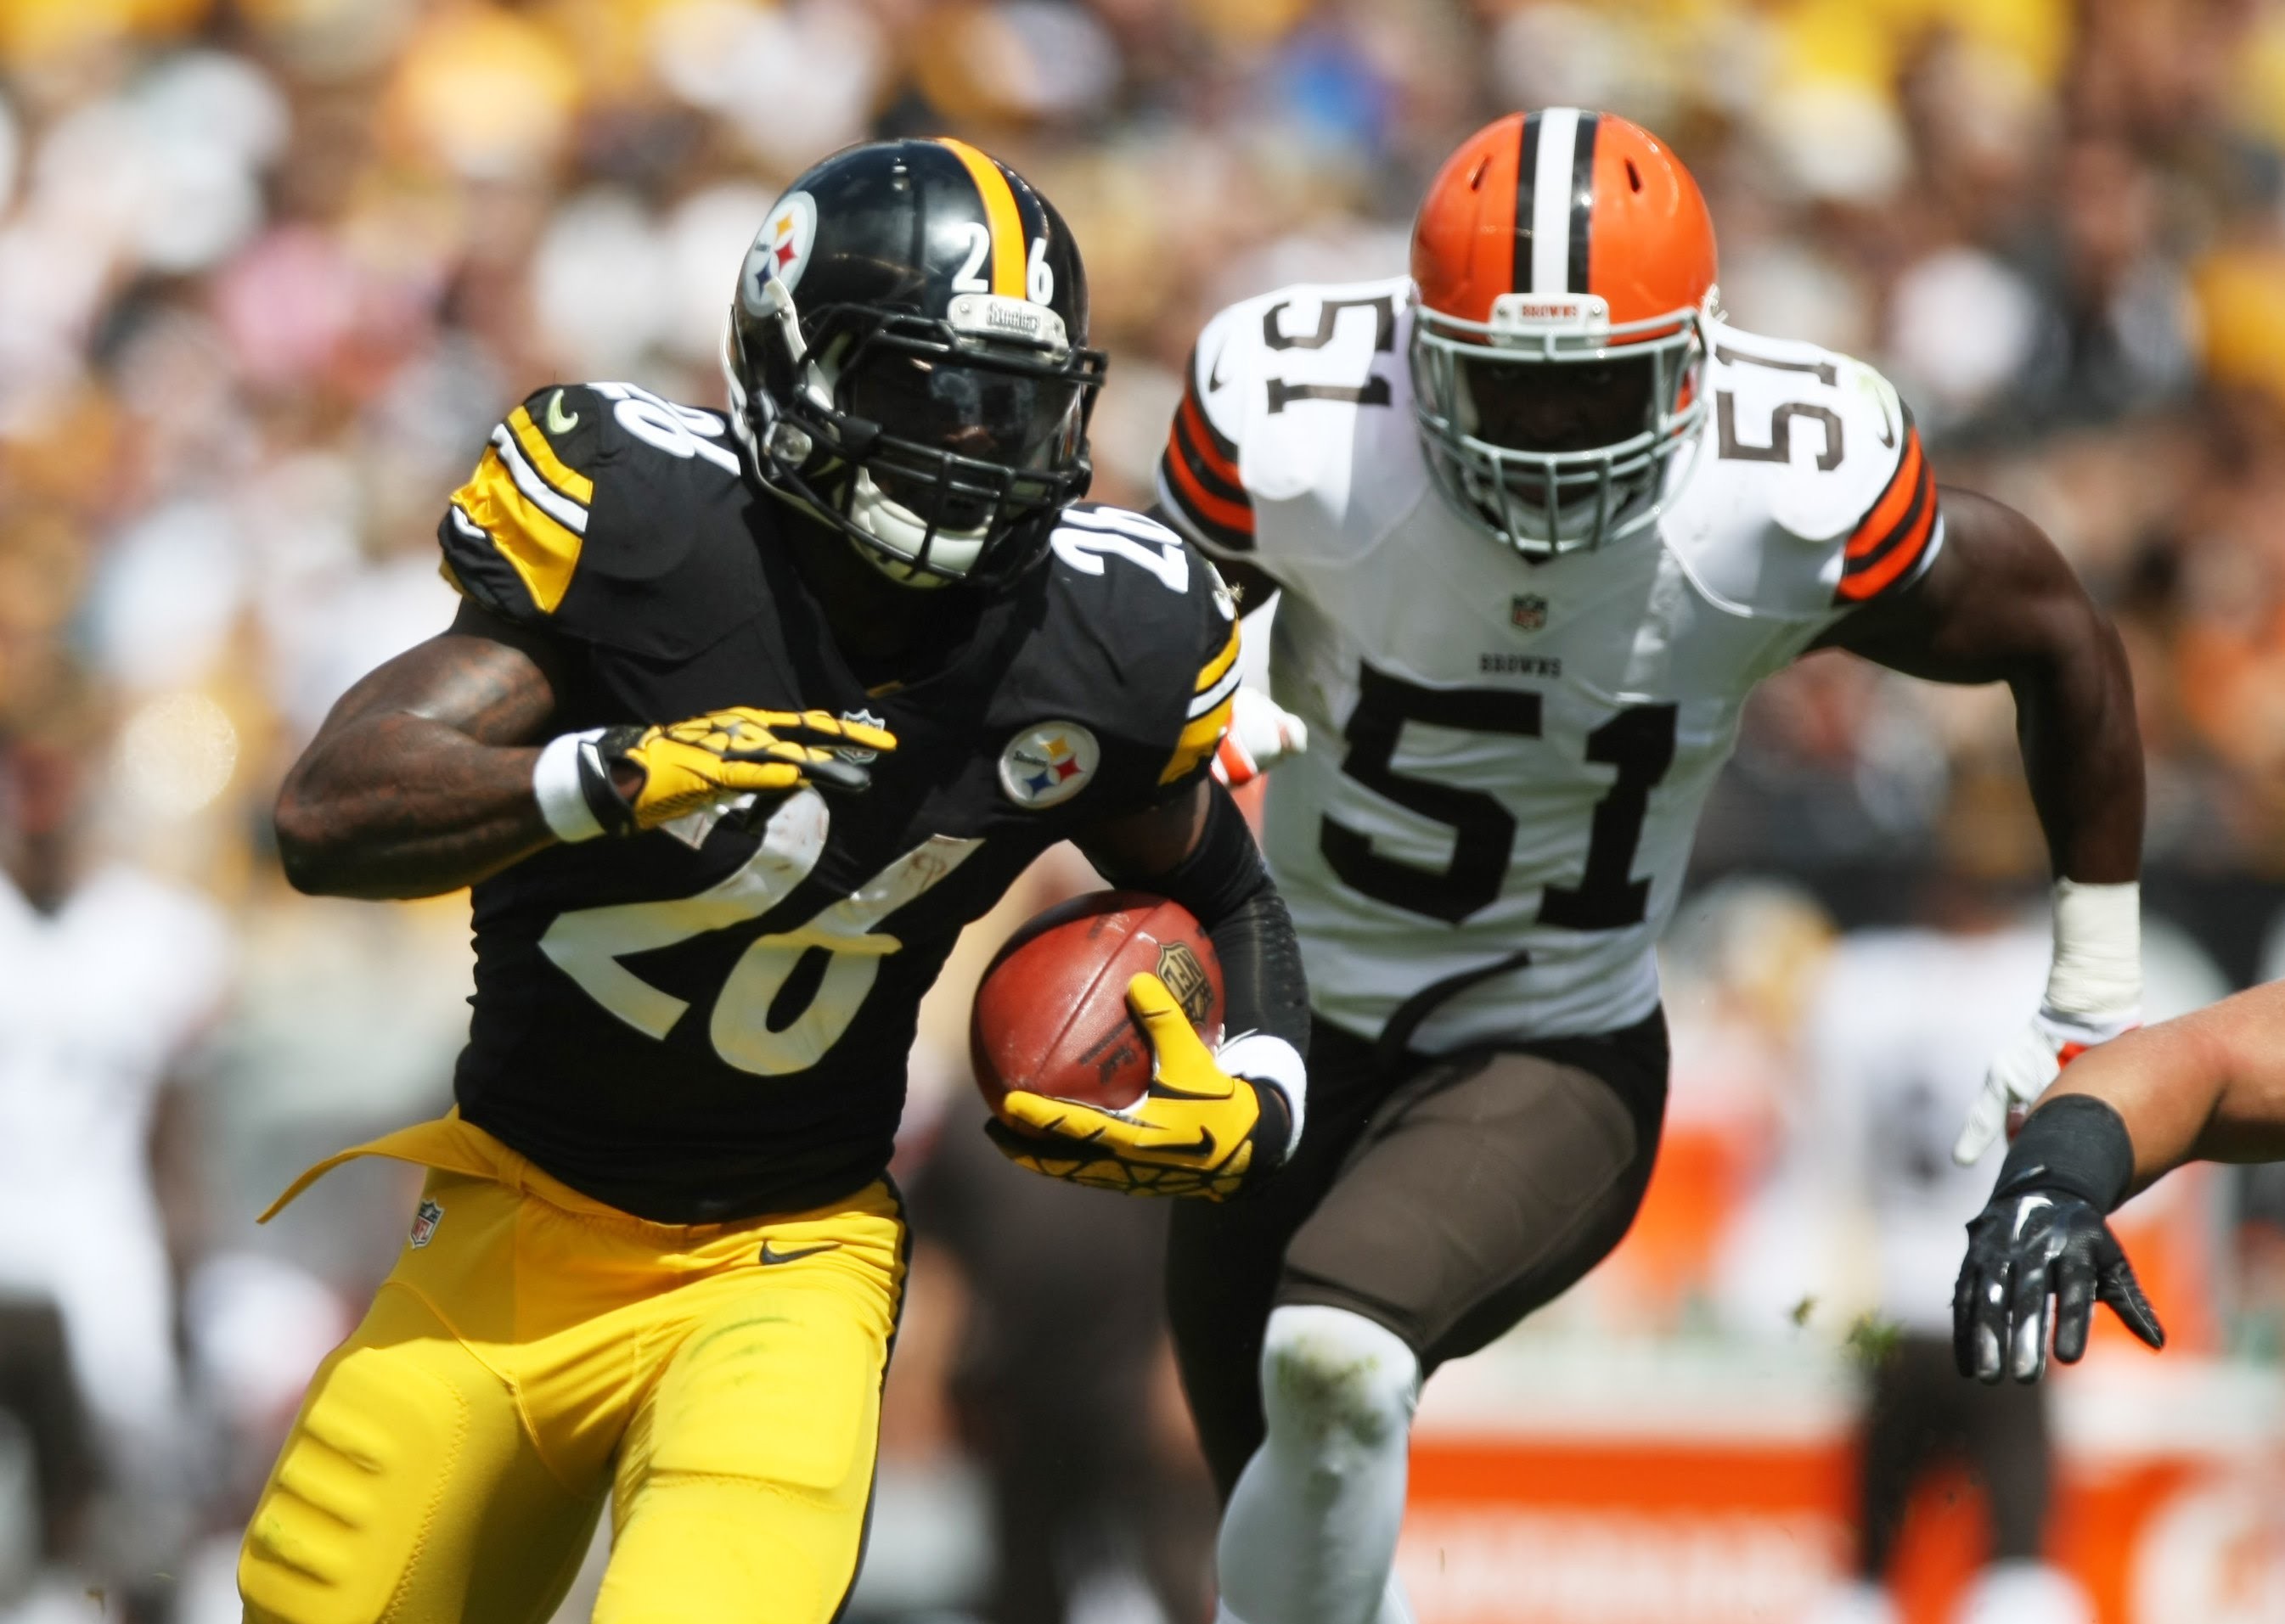 LeVeon Bell Breaks Ankles on 38 yd TD run against the Browns – YouTube